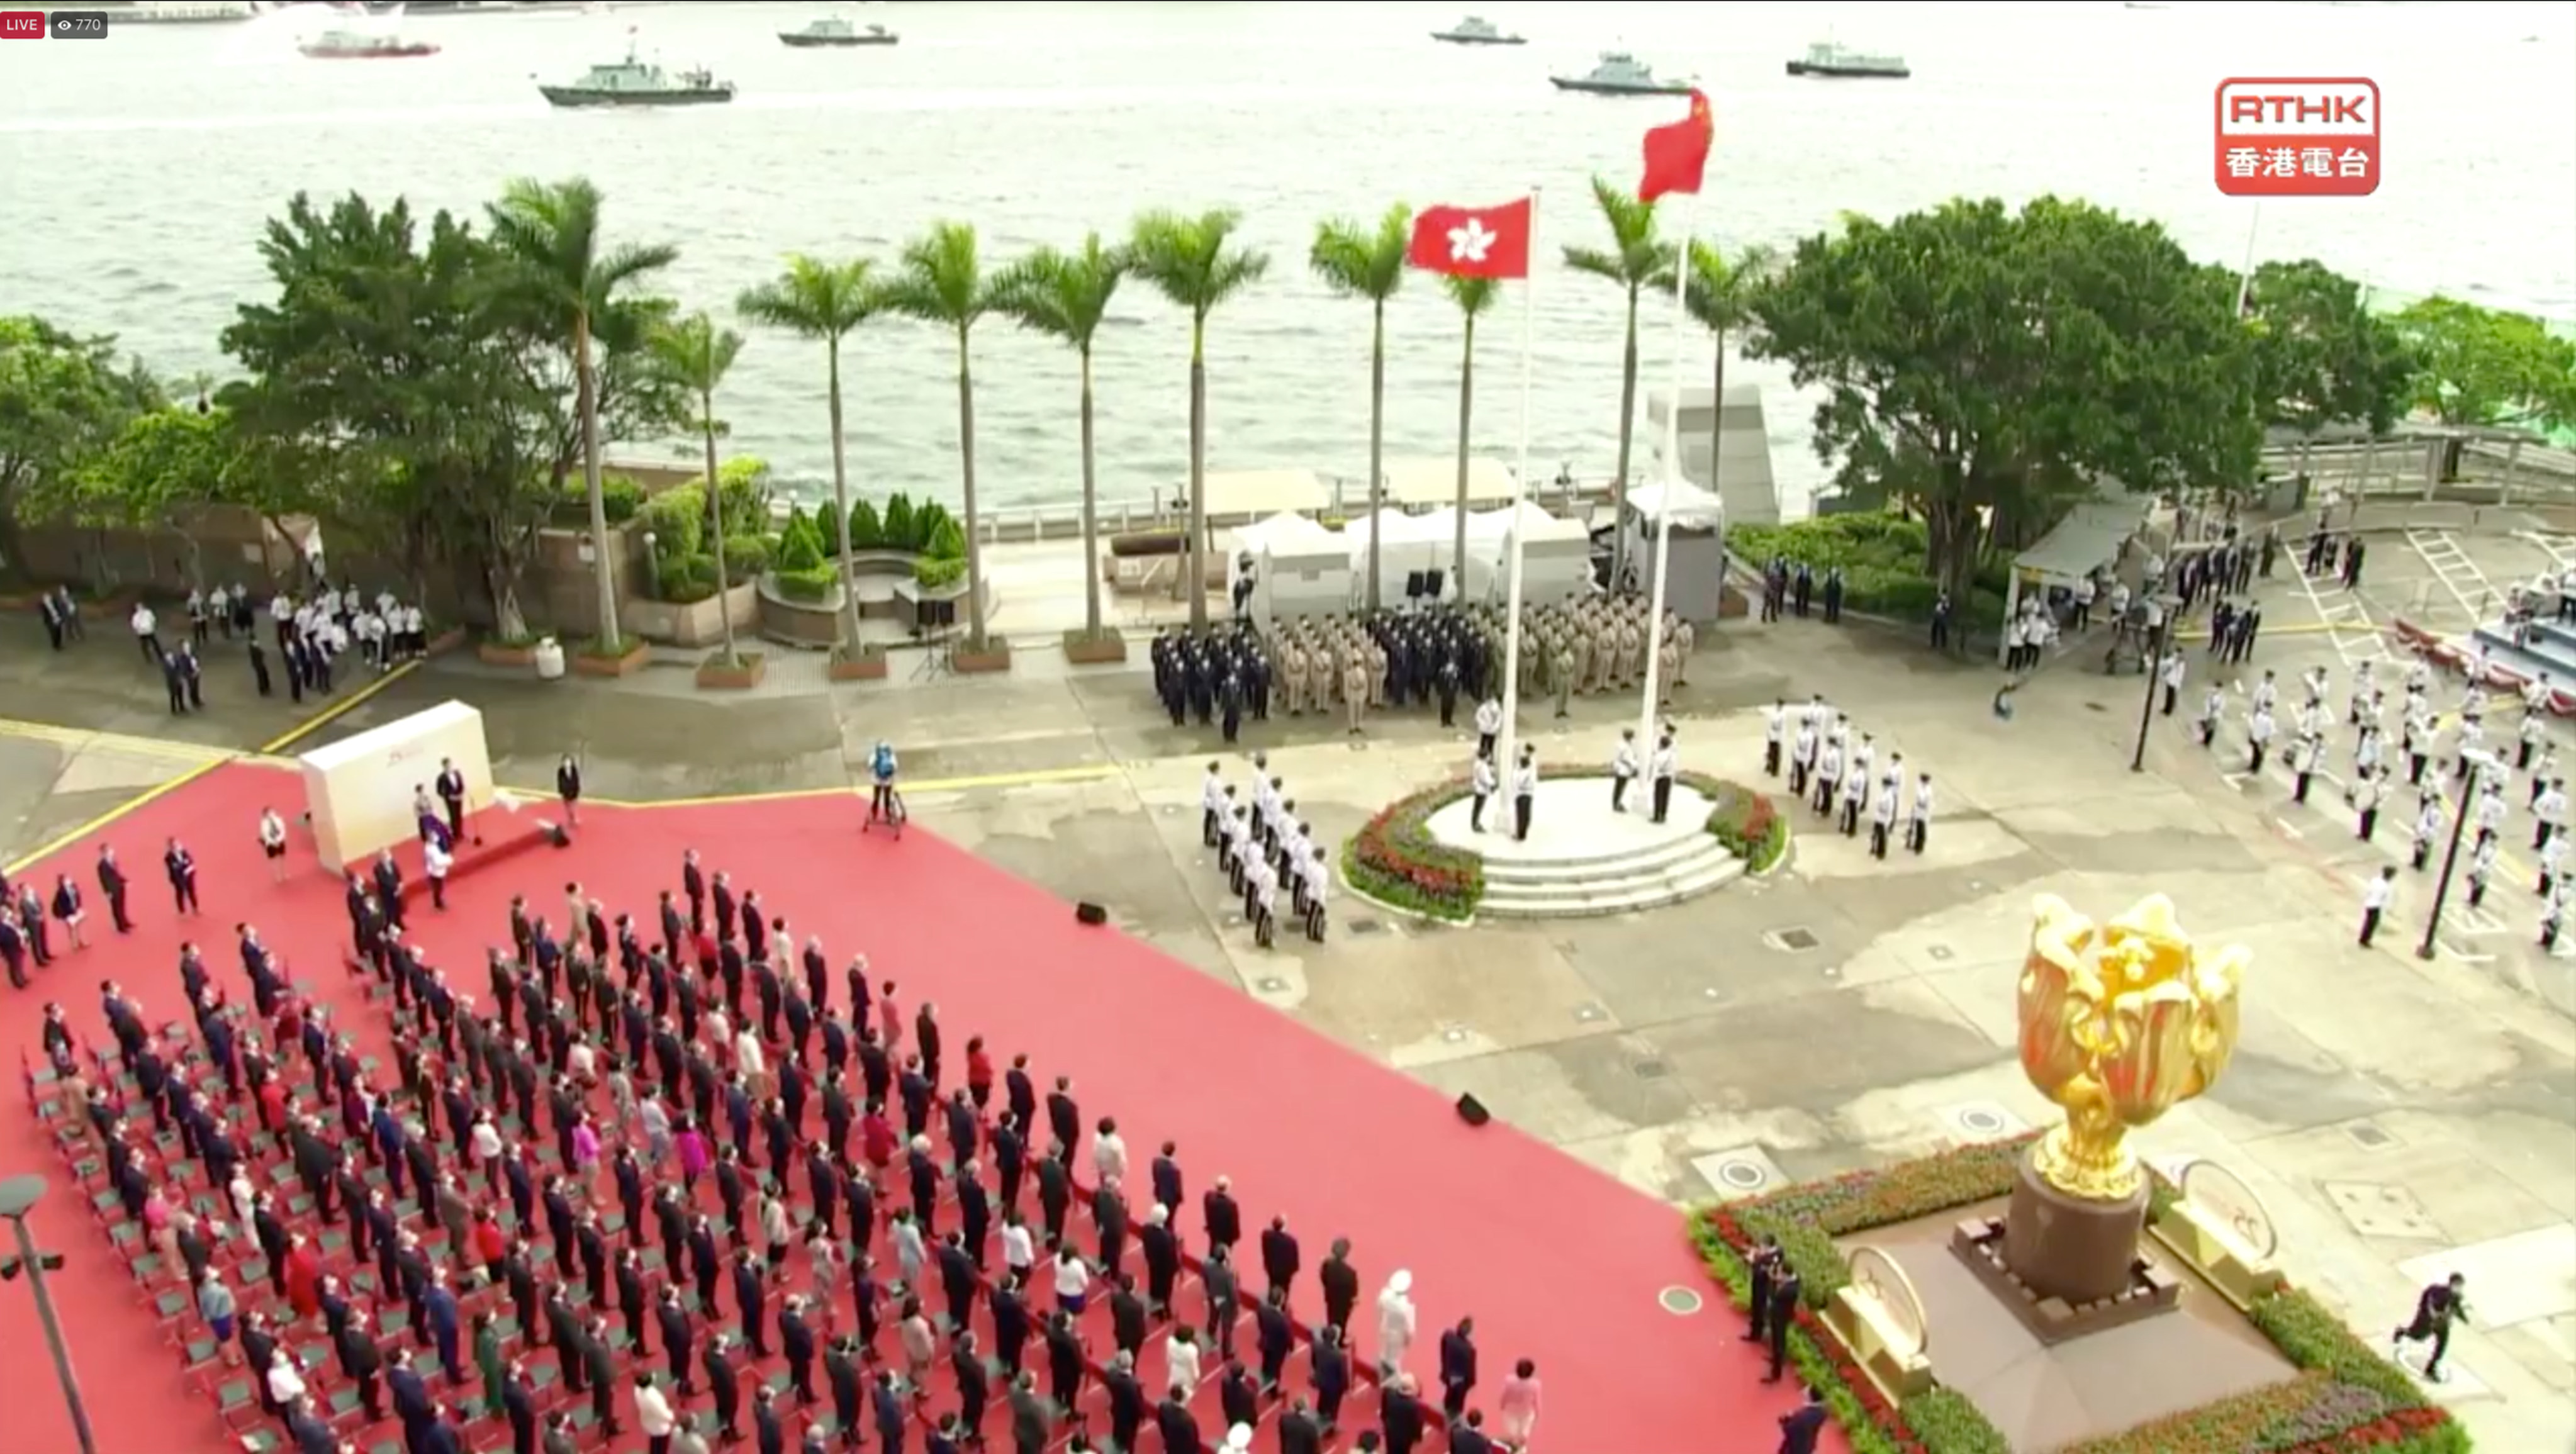 Hong Kong officials in Wan Chai attend a flag-raising ceremony under inclement weather. Photo: RTHK